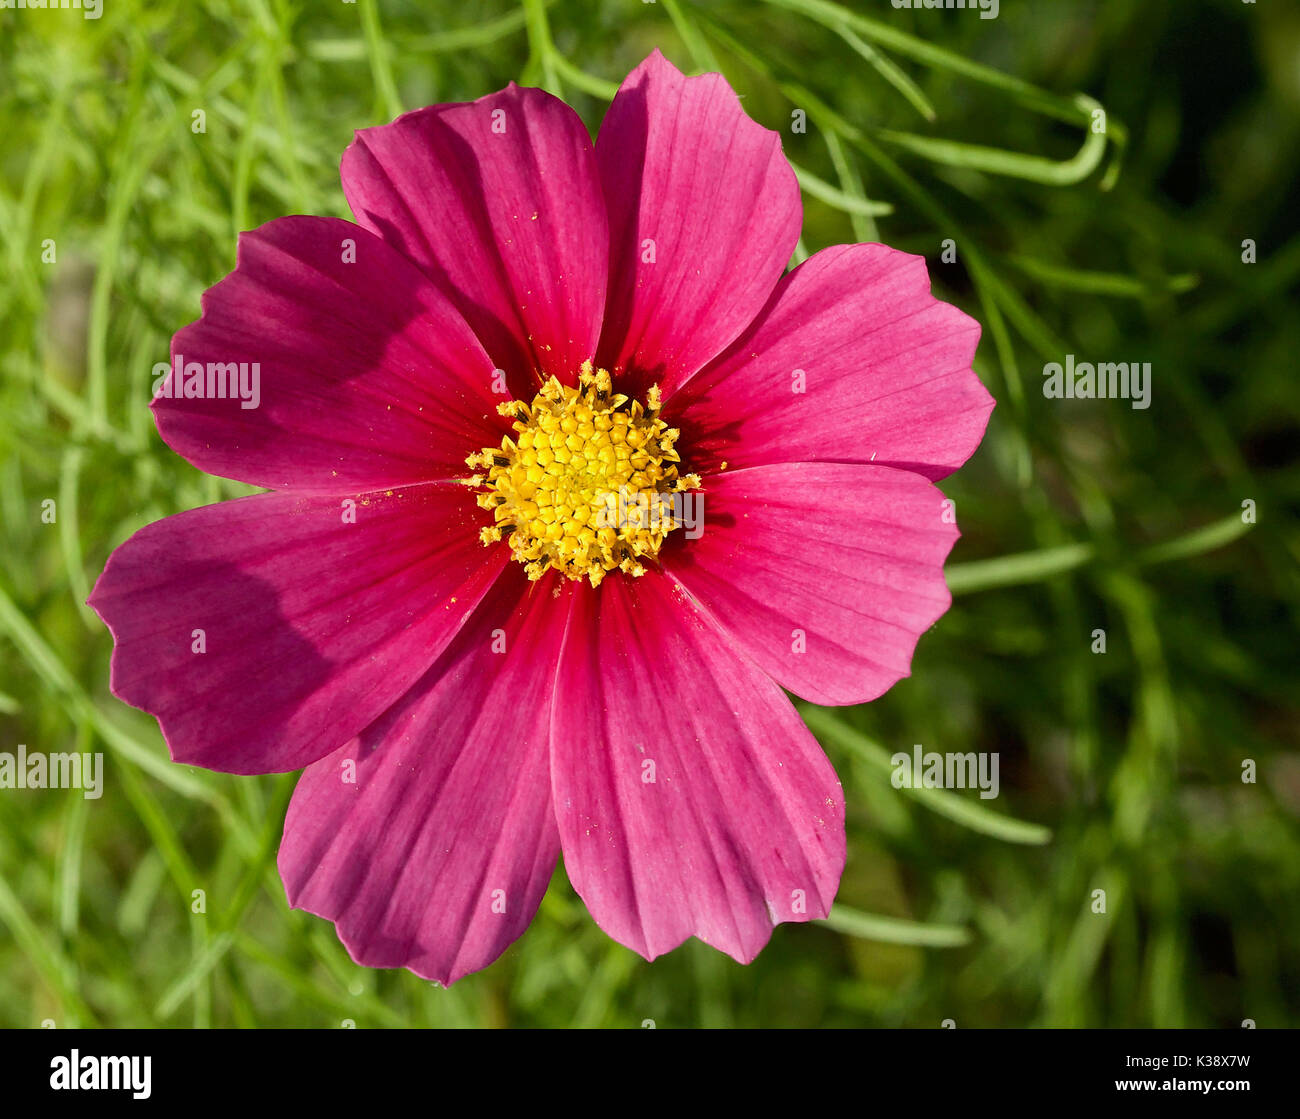 Closeup of pink daisy with bright gold center Stock Photo